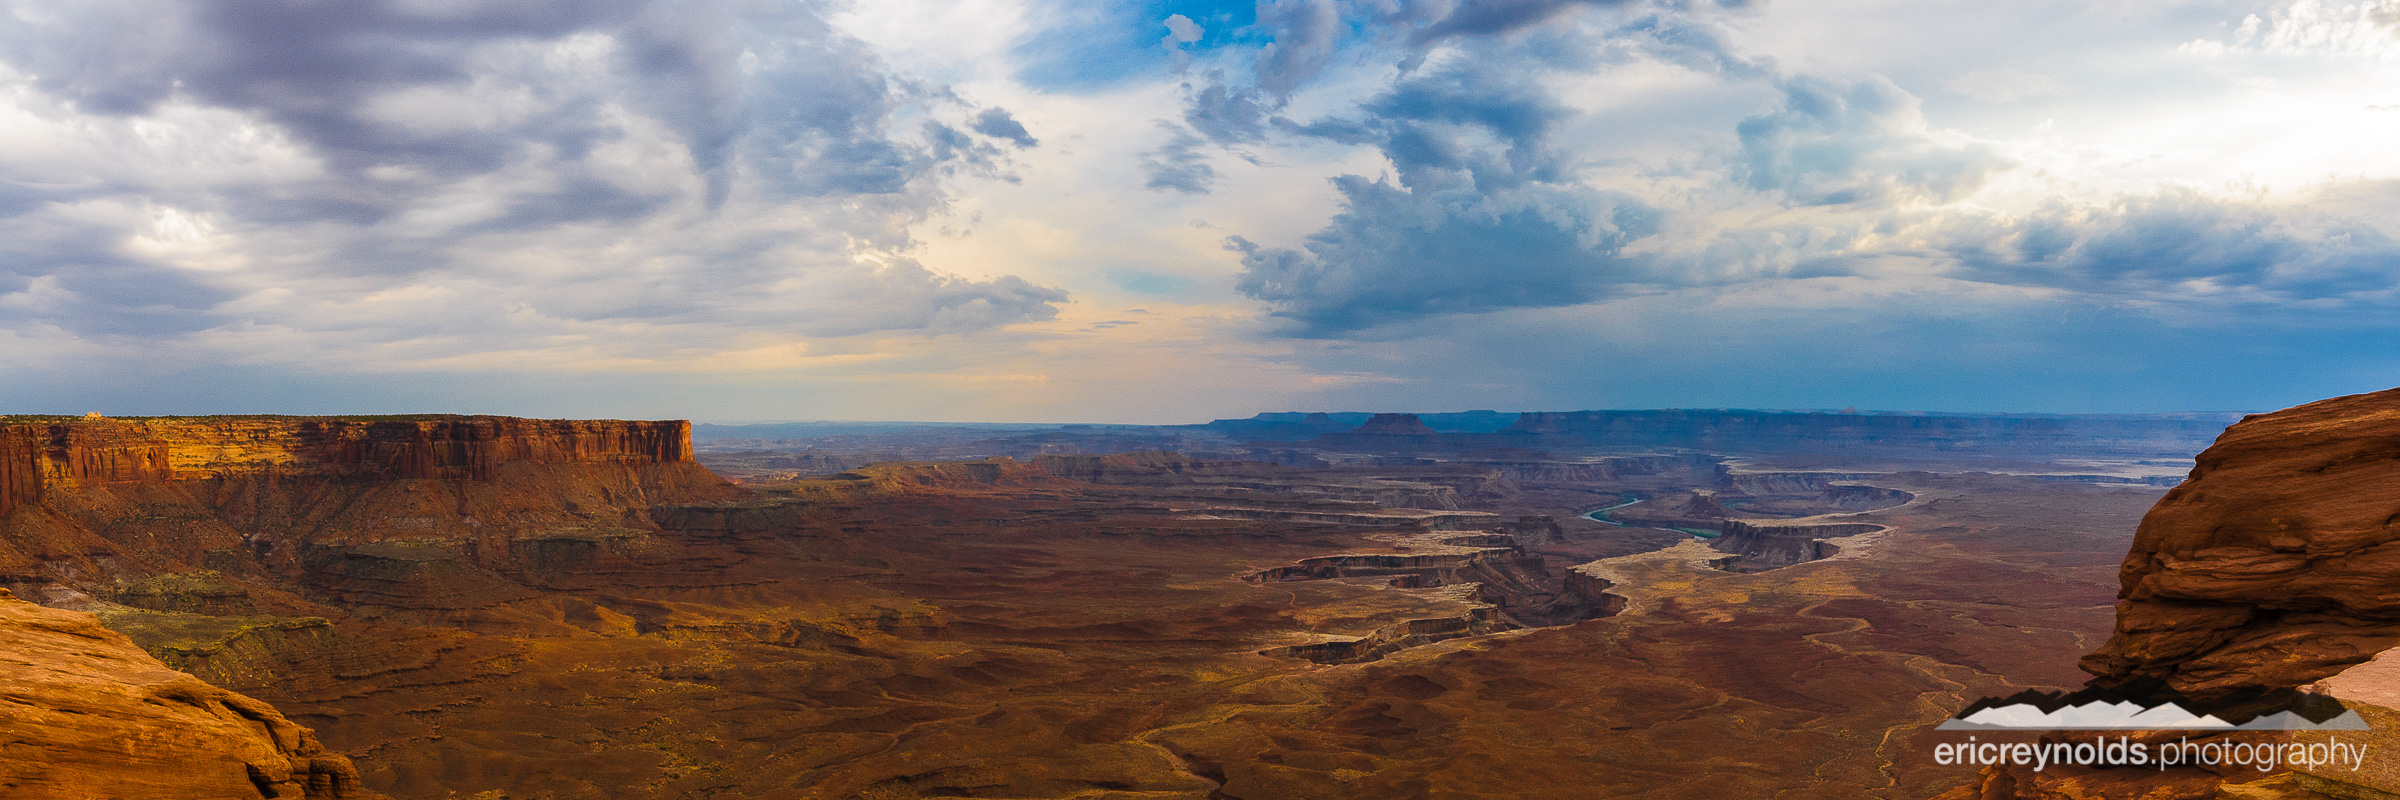 Green River Overlook by Eric Reynolds - Landscape Photographer